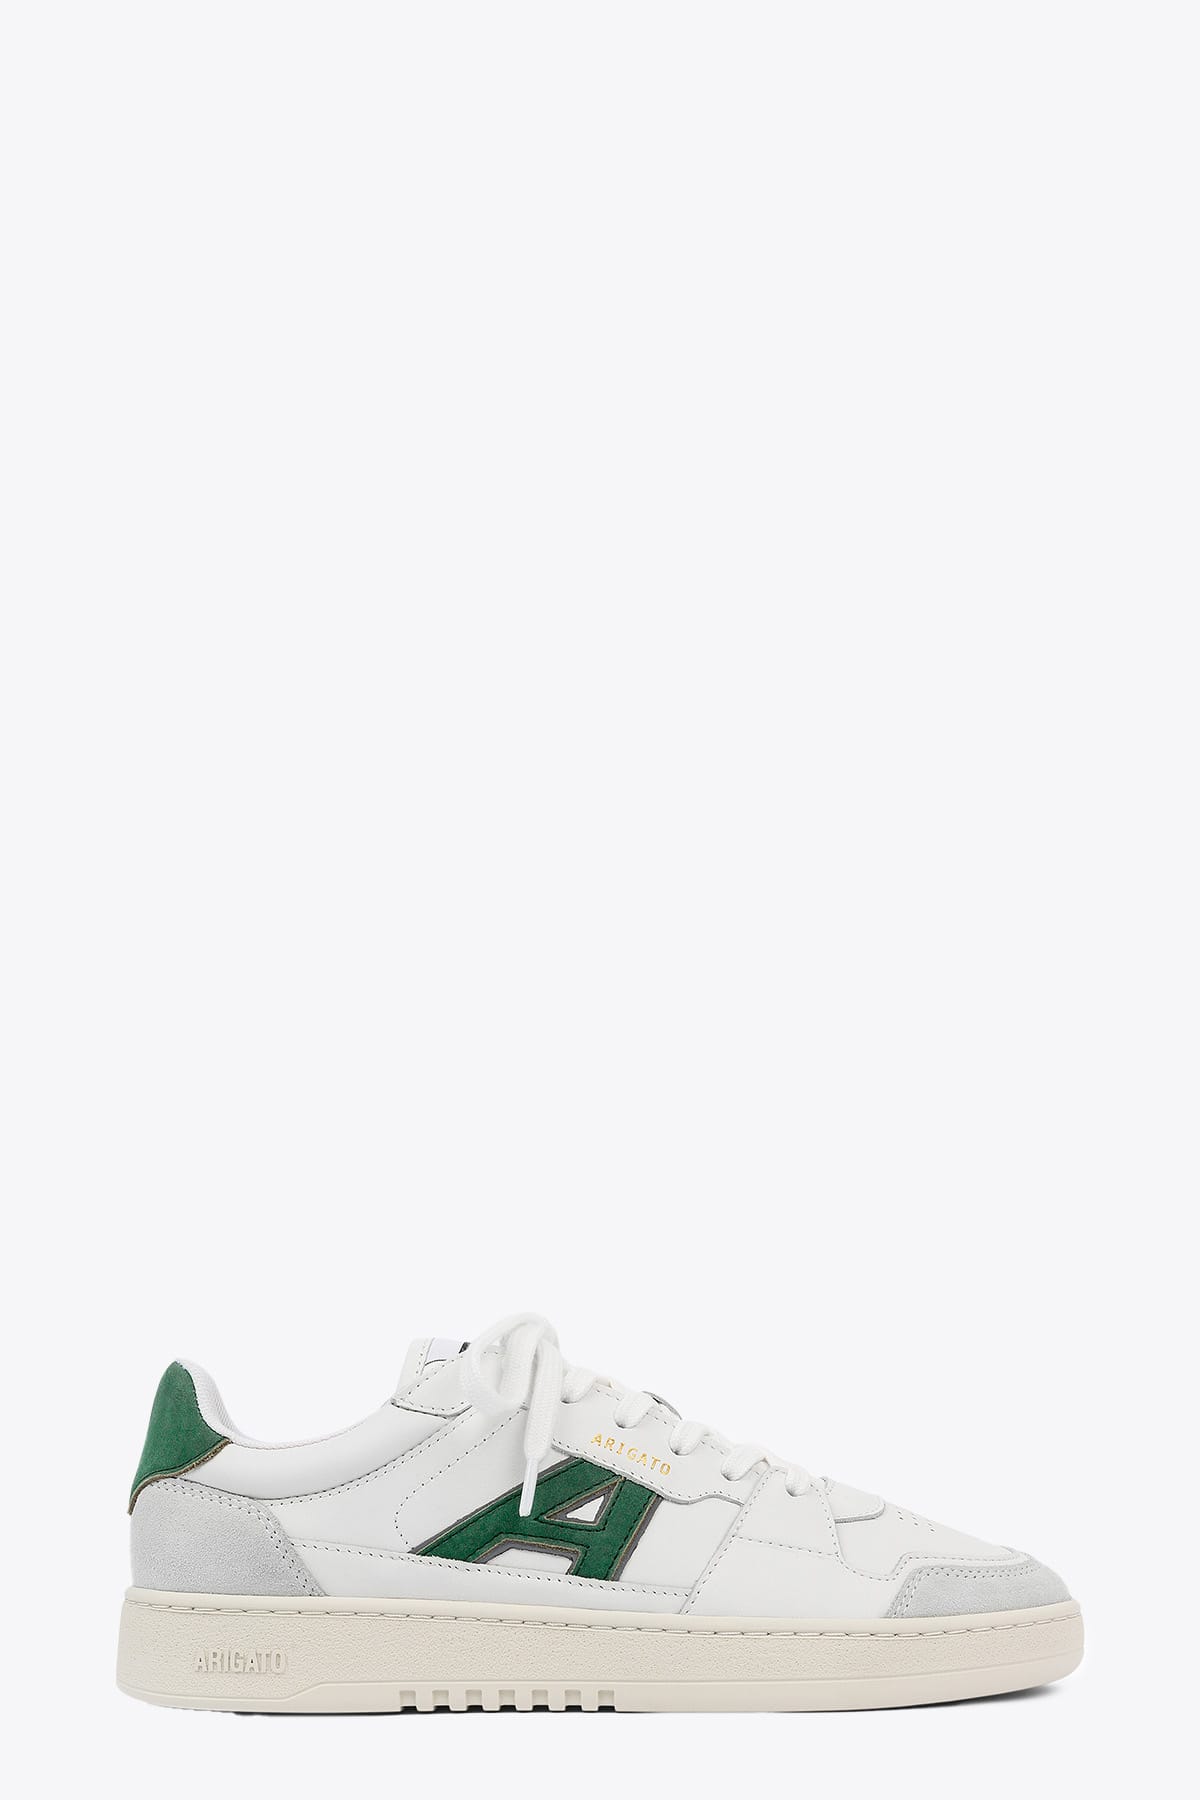 Axel Arigato A-dice Lo Sneaker White leather low sneaker with side A - A-Dice lo sneaker